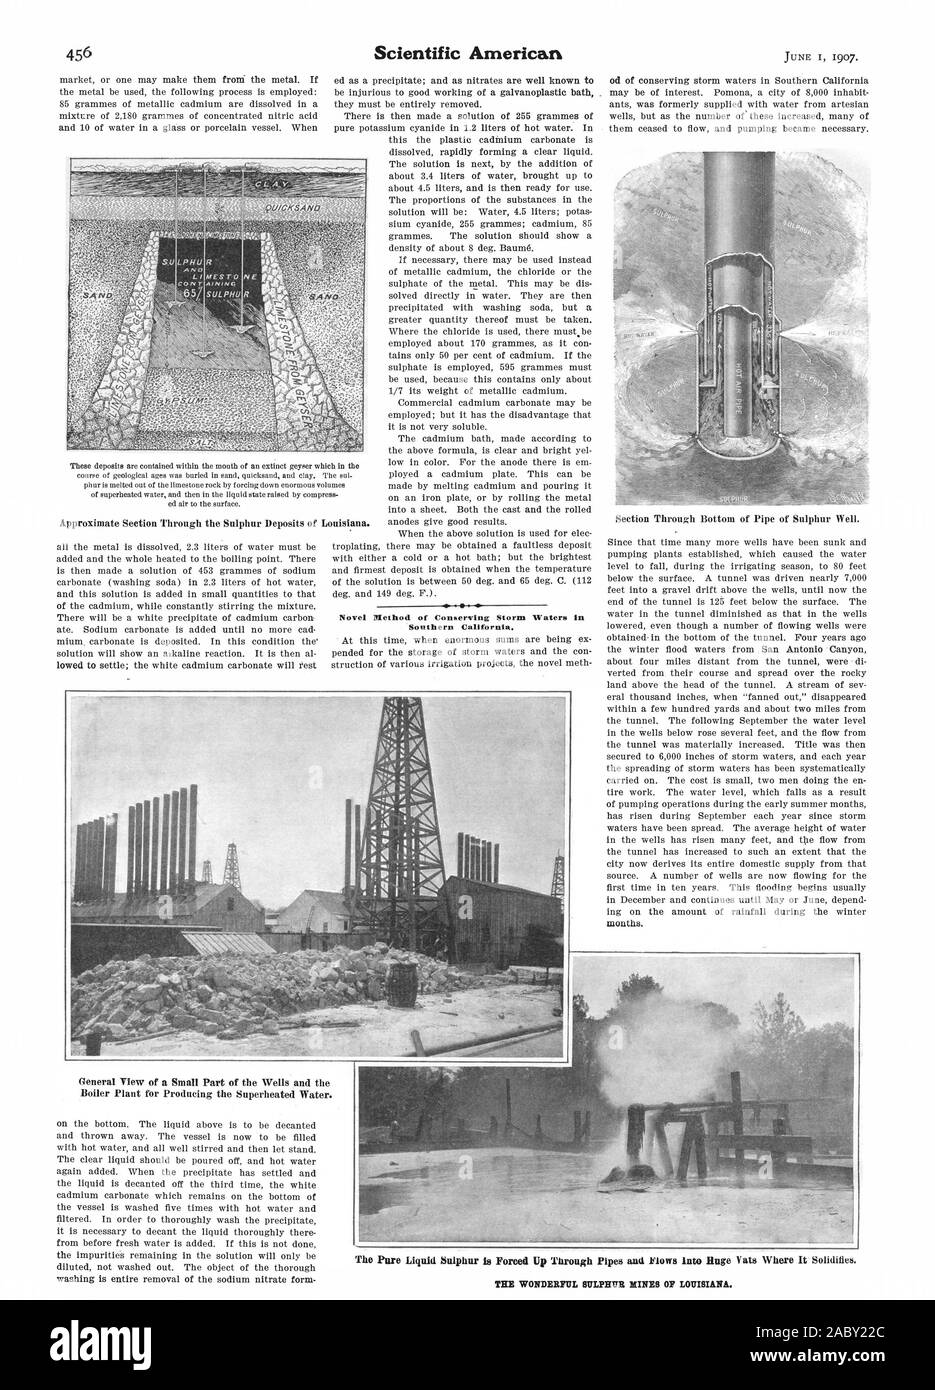 Novel Method of Conserving Storm Waters In Southern California. months. Approximate Section Through the Sulphur Deposits of Louisiana. .  .   The Pure Liquid Sulphur is Forced Up Through Pipes and Flows into Huge Vats Where It Solidifies. THE WONDERFUL SULPHUR MINES OF LOUISIANA., scientific american, 1907-06-11 Stock Photo